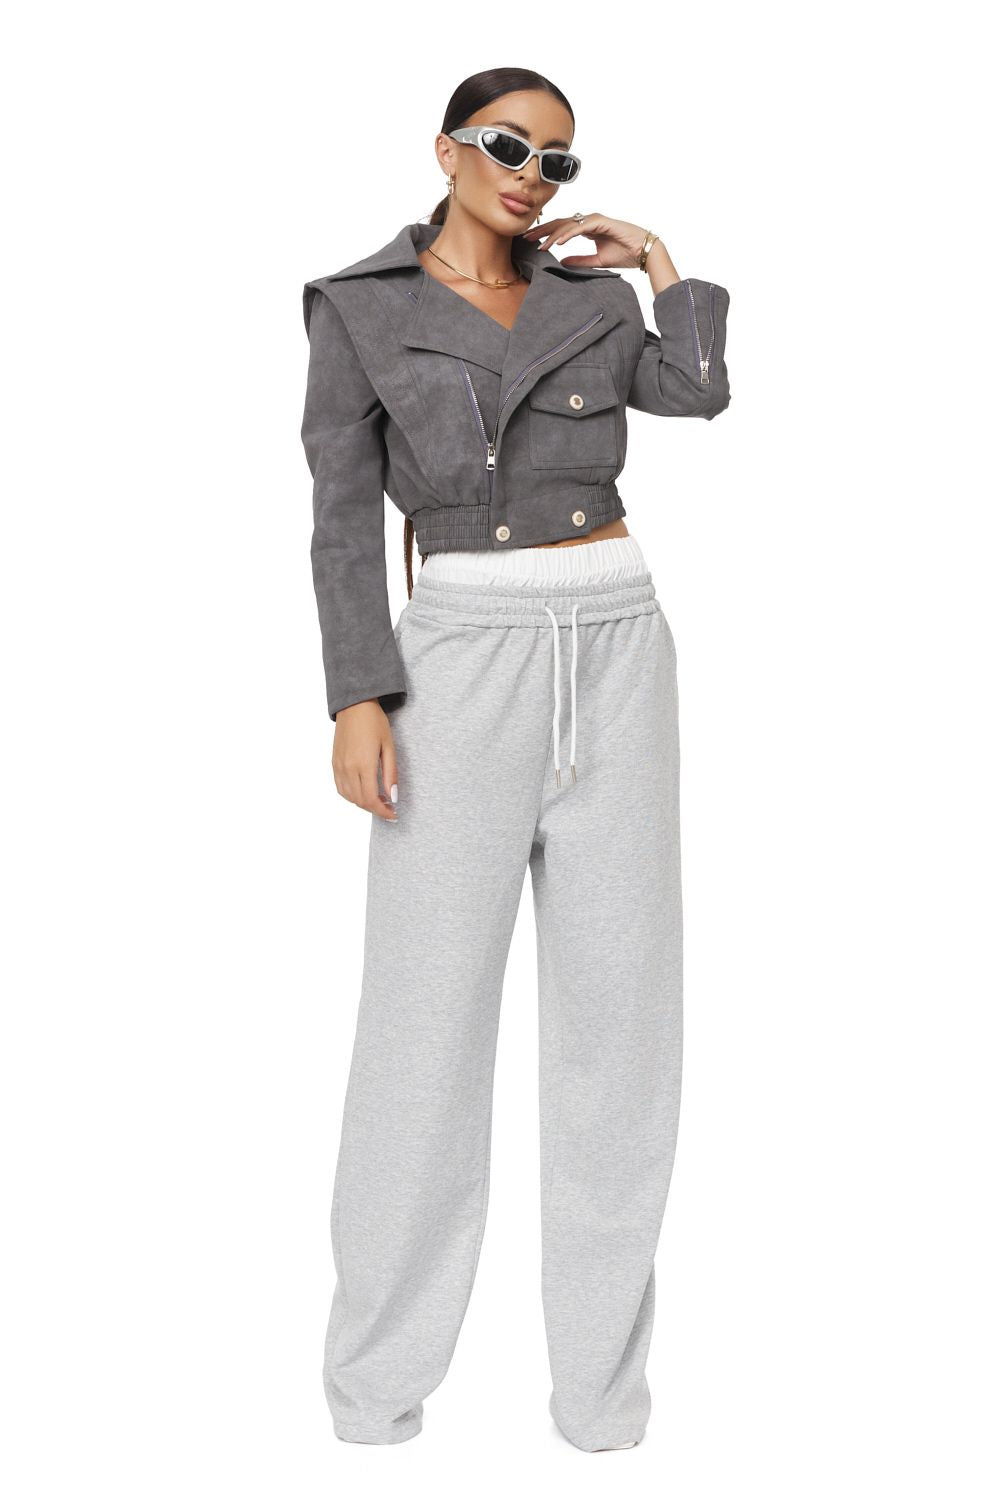 Visay Bogas grey casual ladies trousers